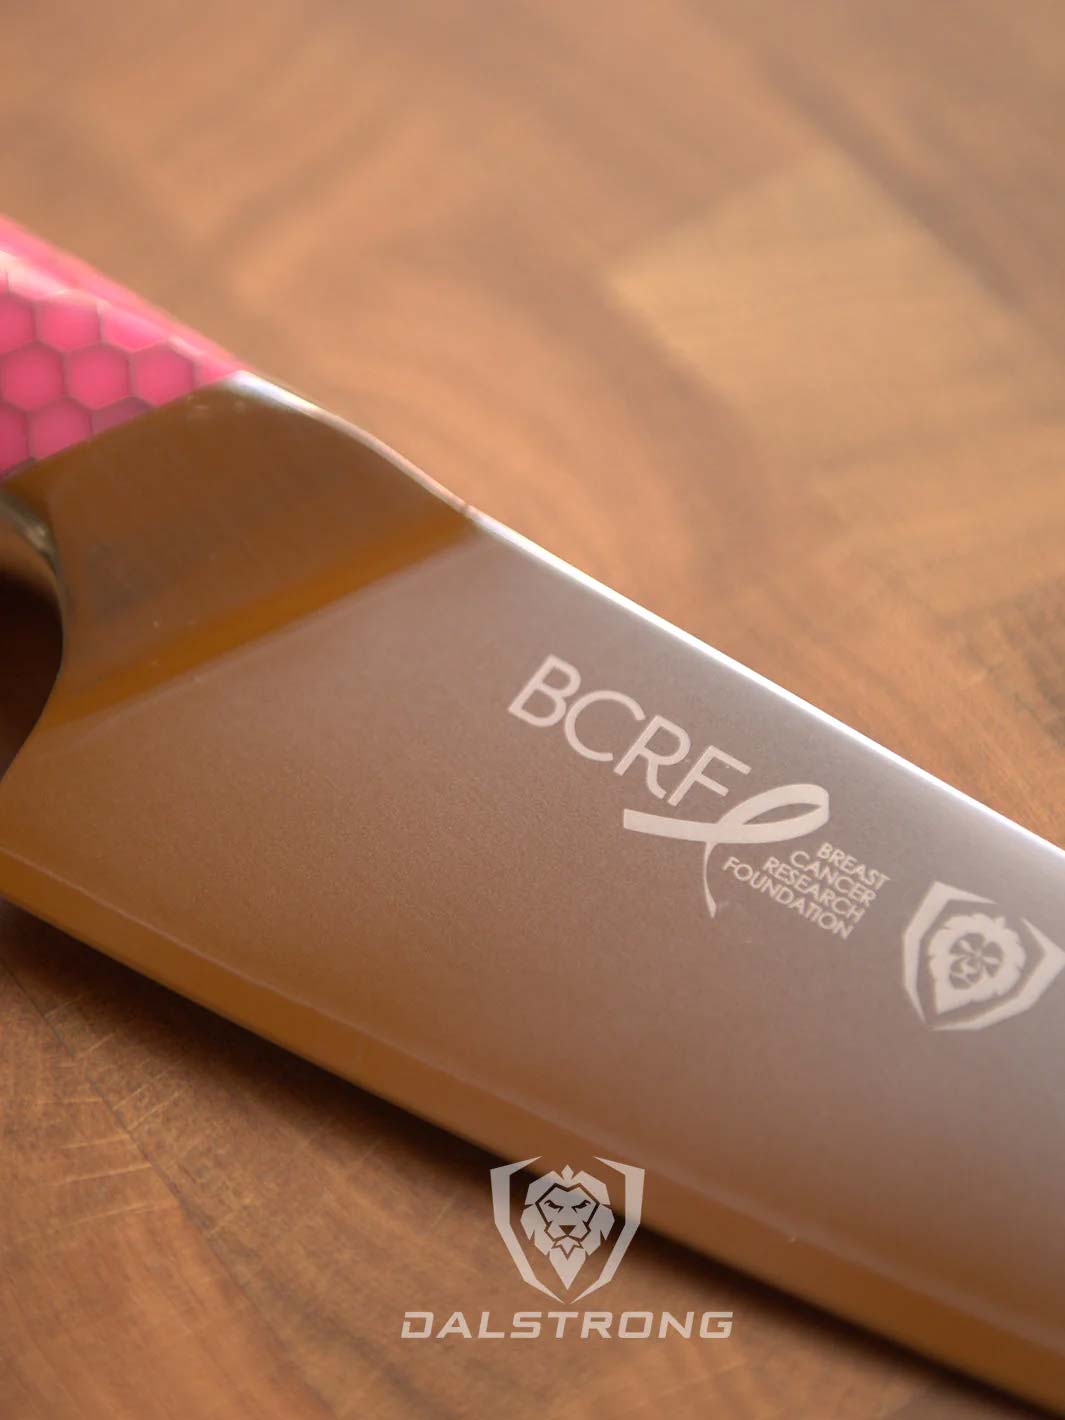 Dalstrong frost fire series 8 inch chef knife with pink handle showcasing it's blade.